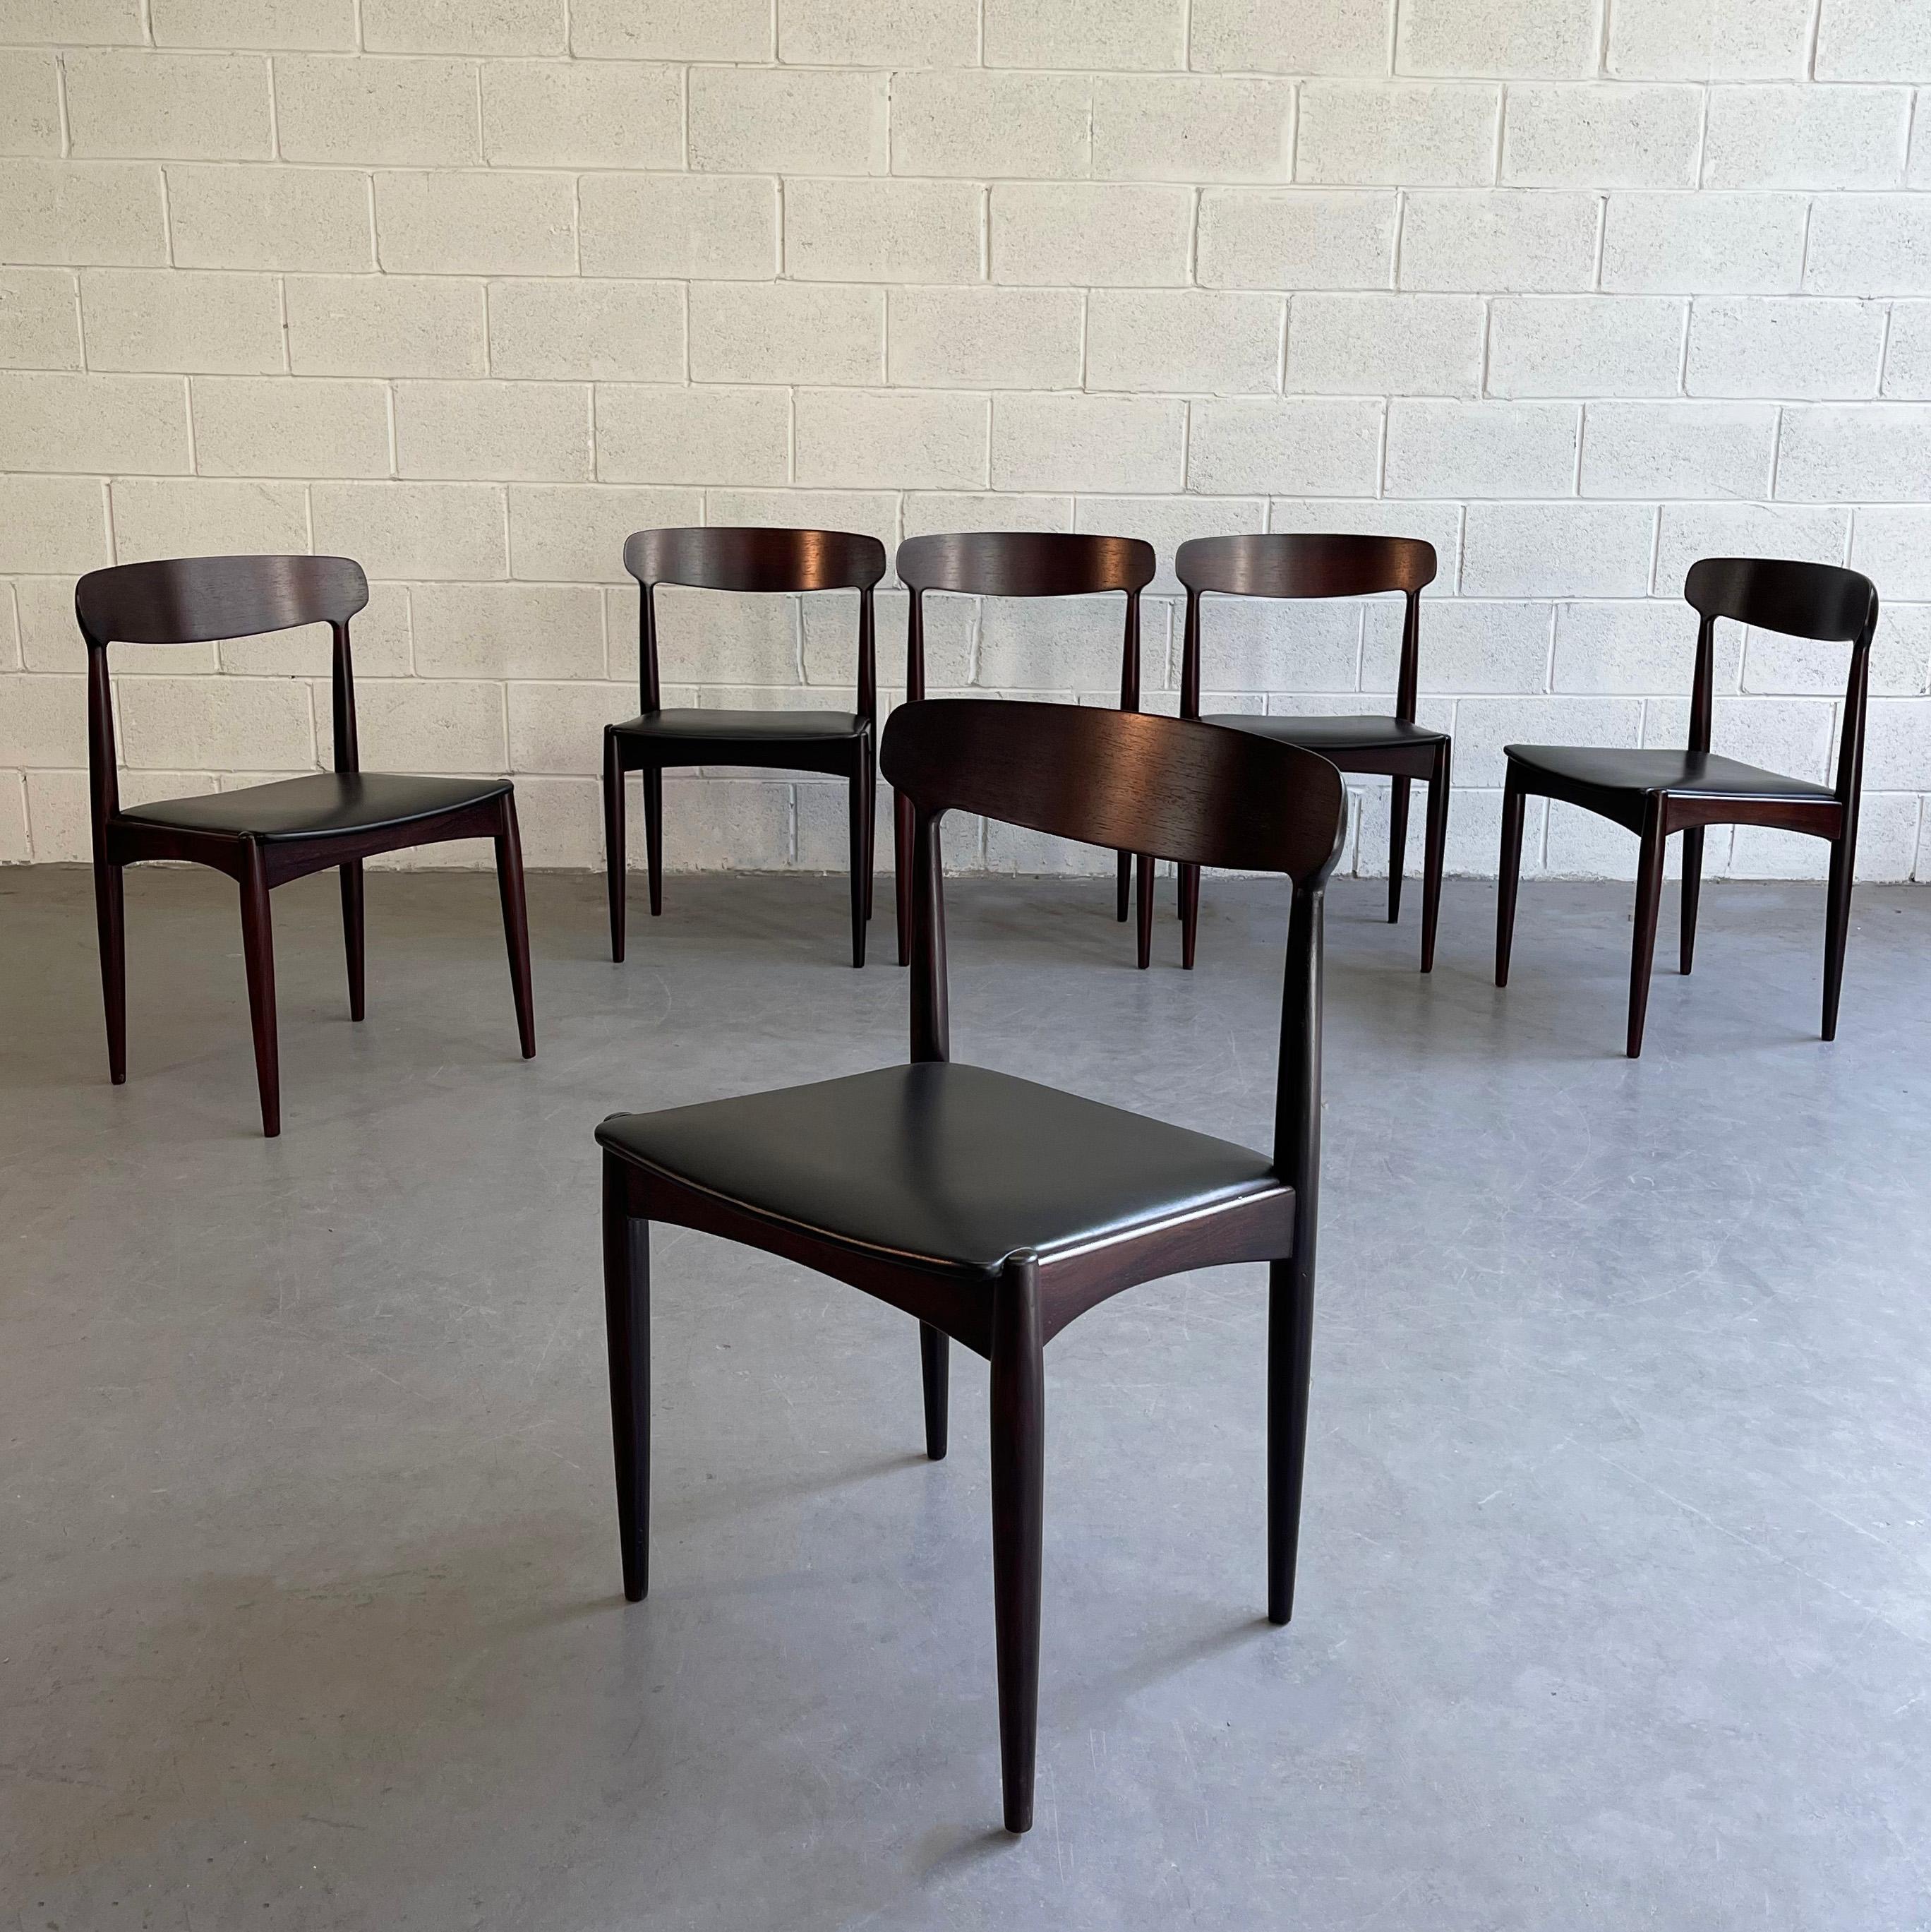 Set of 6, Danish modern dining chairs by Johannes Andersen for Uldum Møbelfabrik feature rosewood frames with black leather seats.